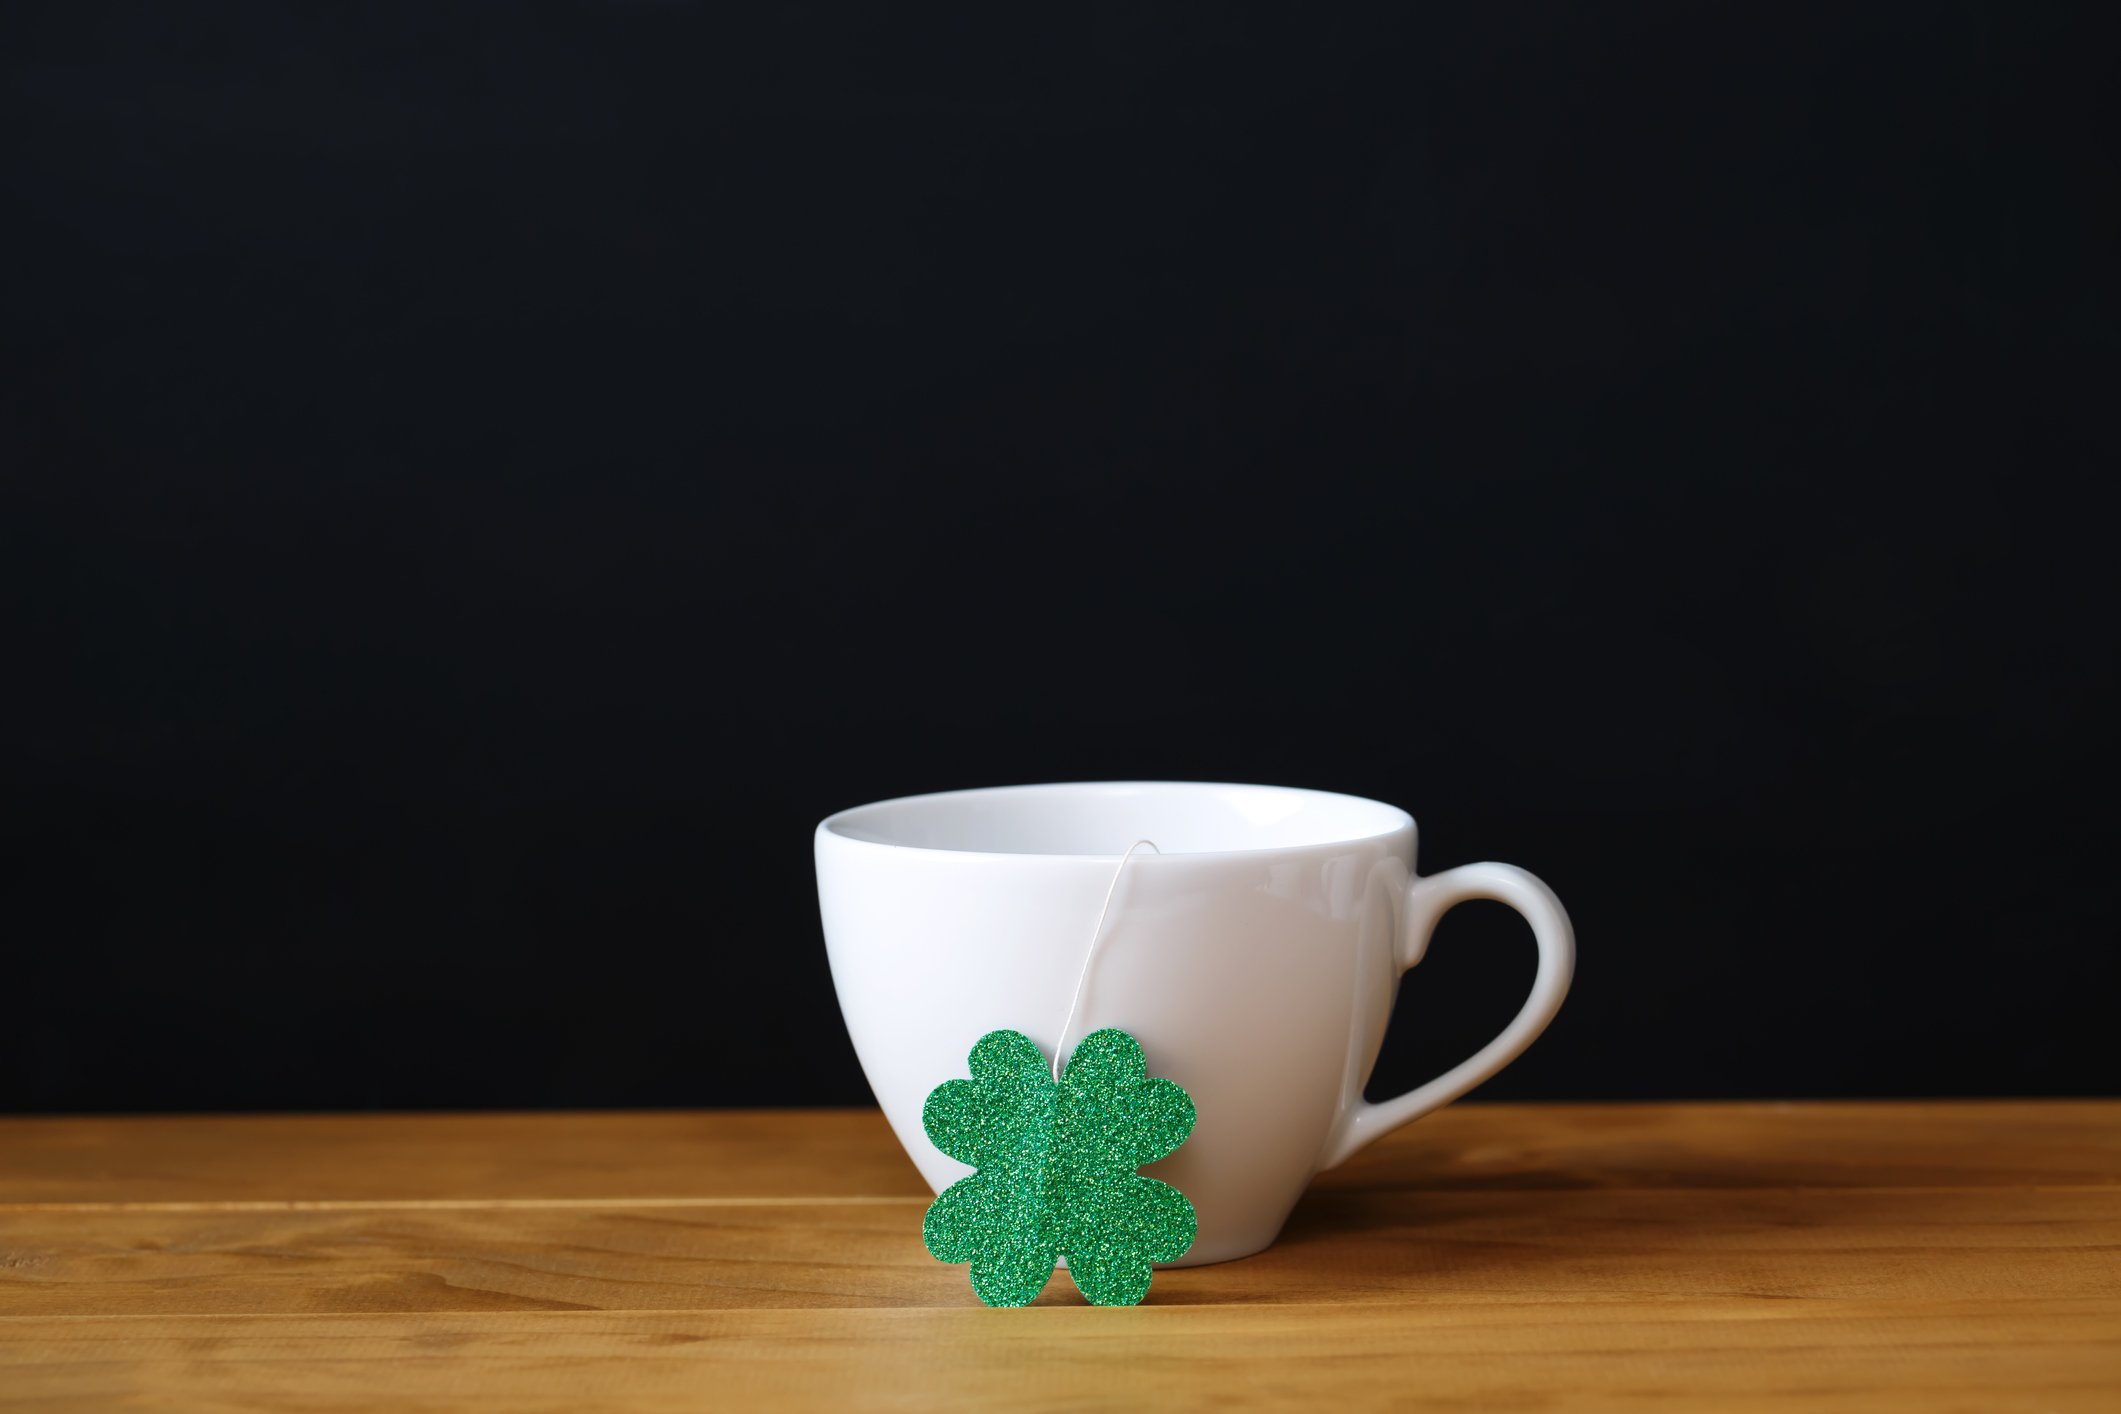 Not a fan of alcohol? You can still celebrate St. Patrick's Day with a soothing cup of Irish tea.